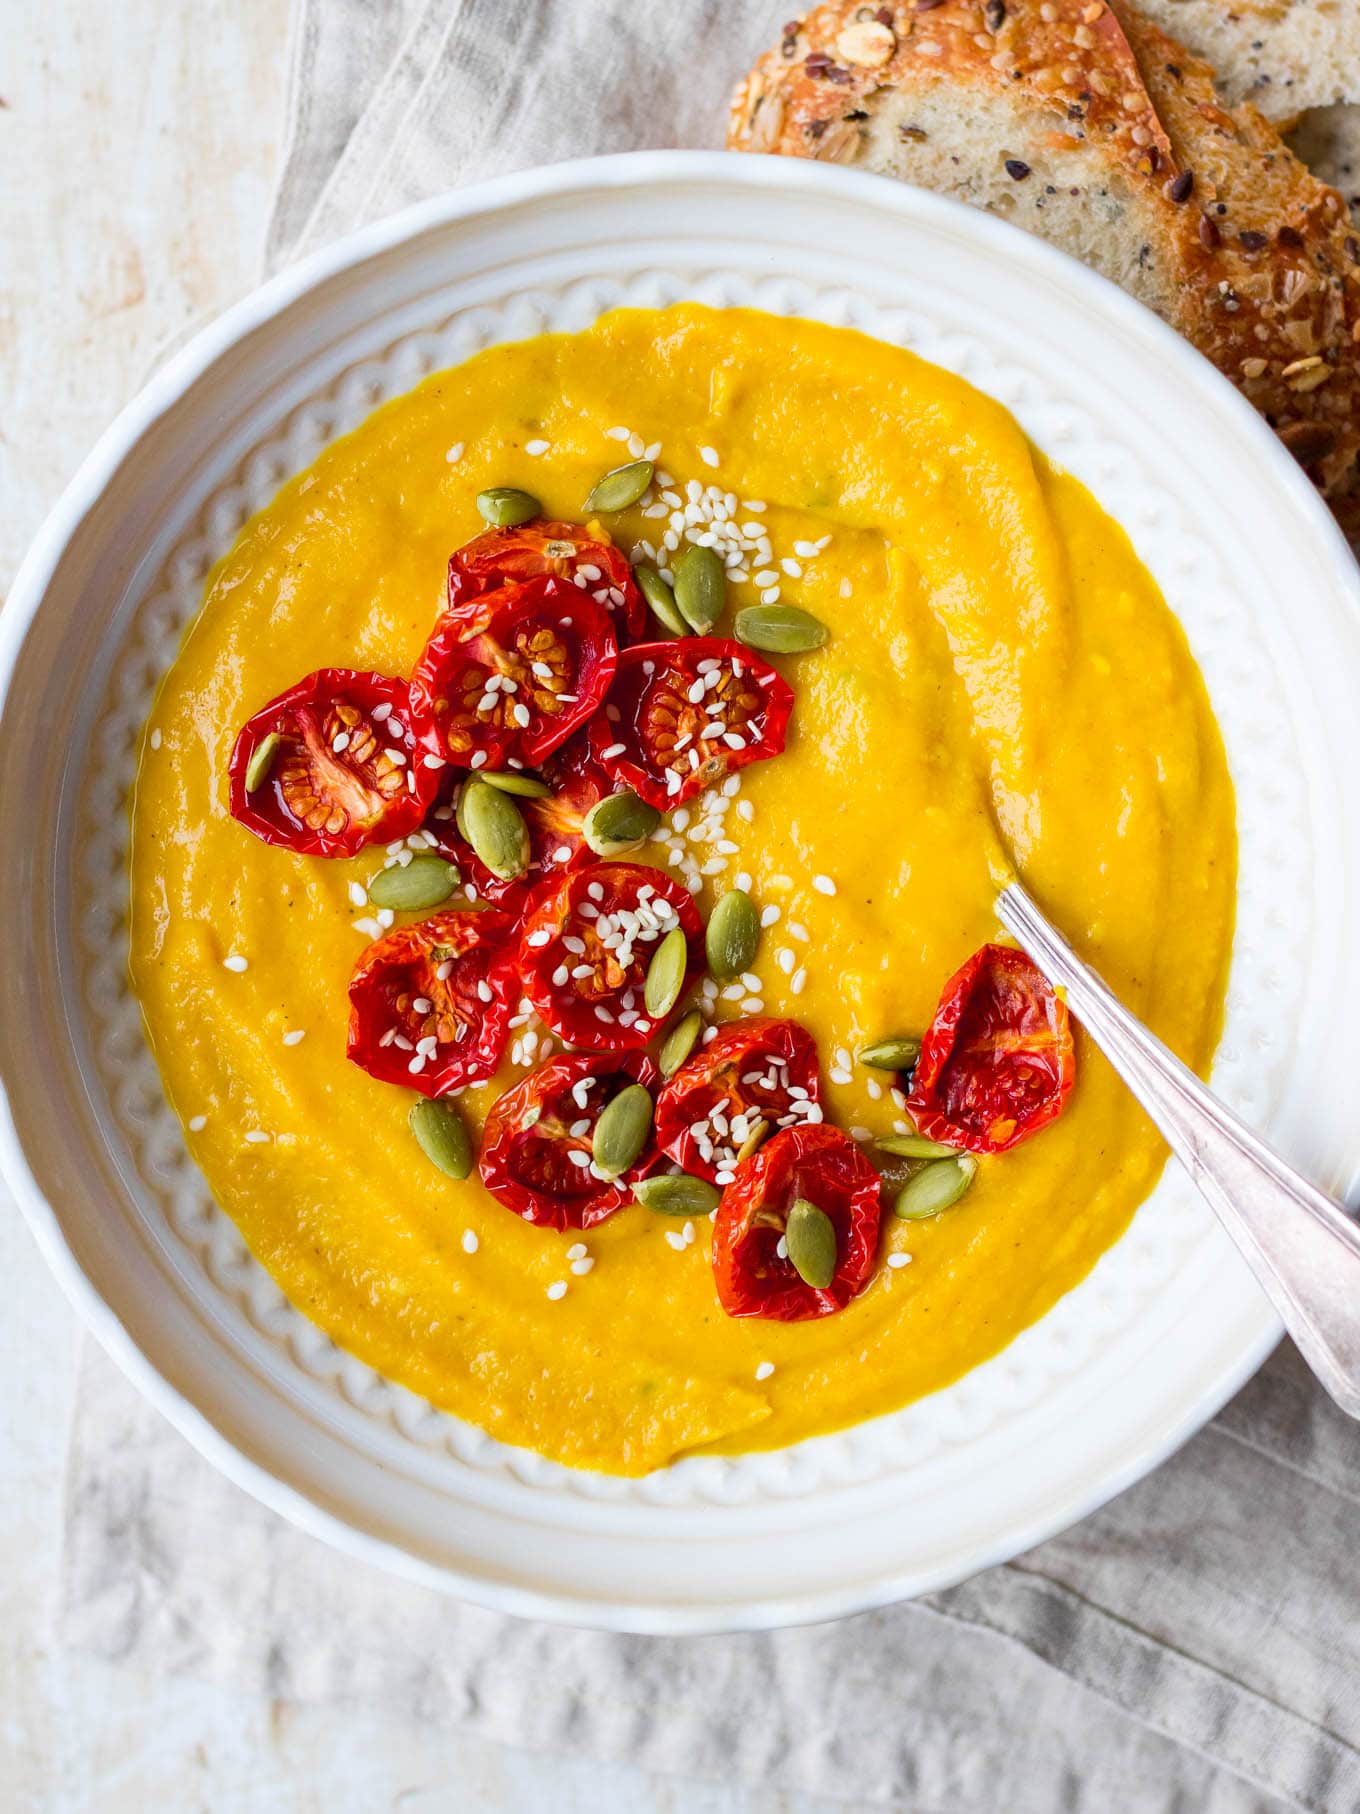 Cauliflower, sweet potato and red lentil soup in white patterned bowl with slow roasted tomatoes